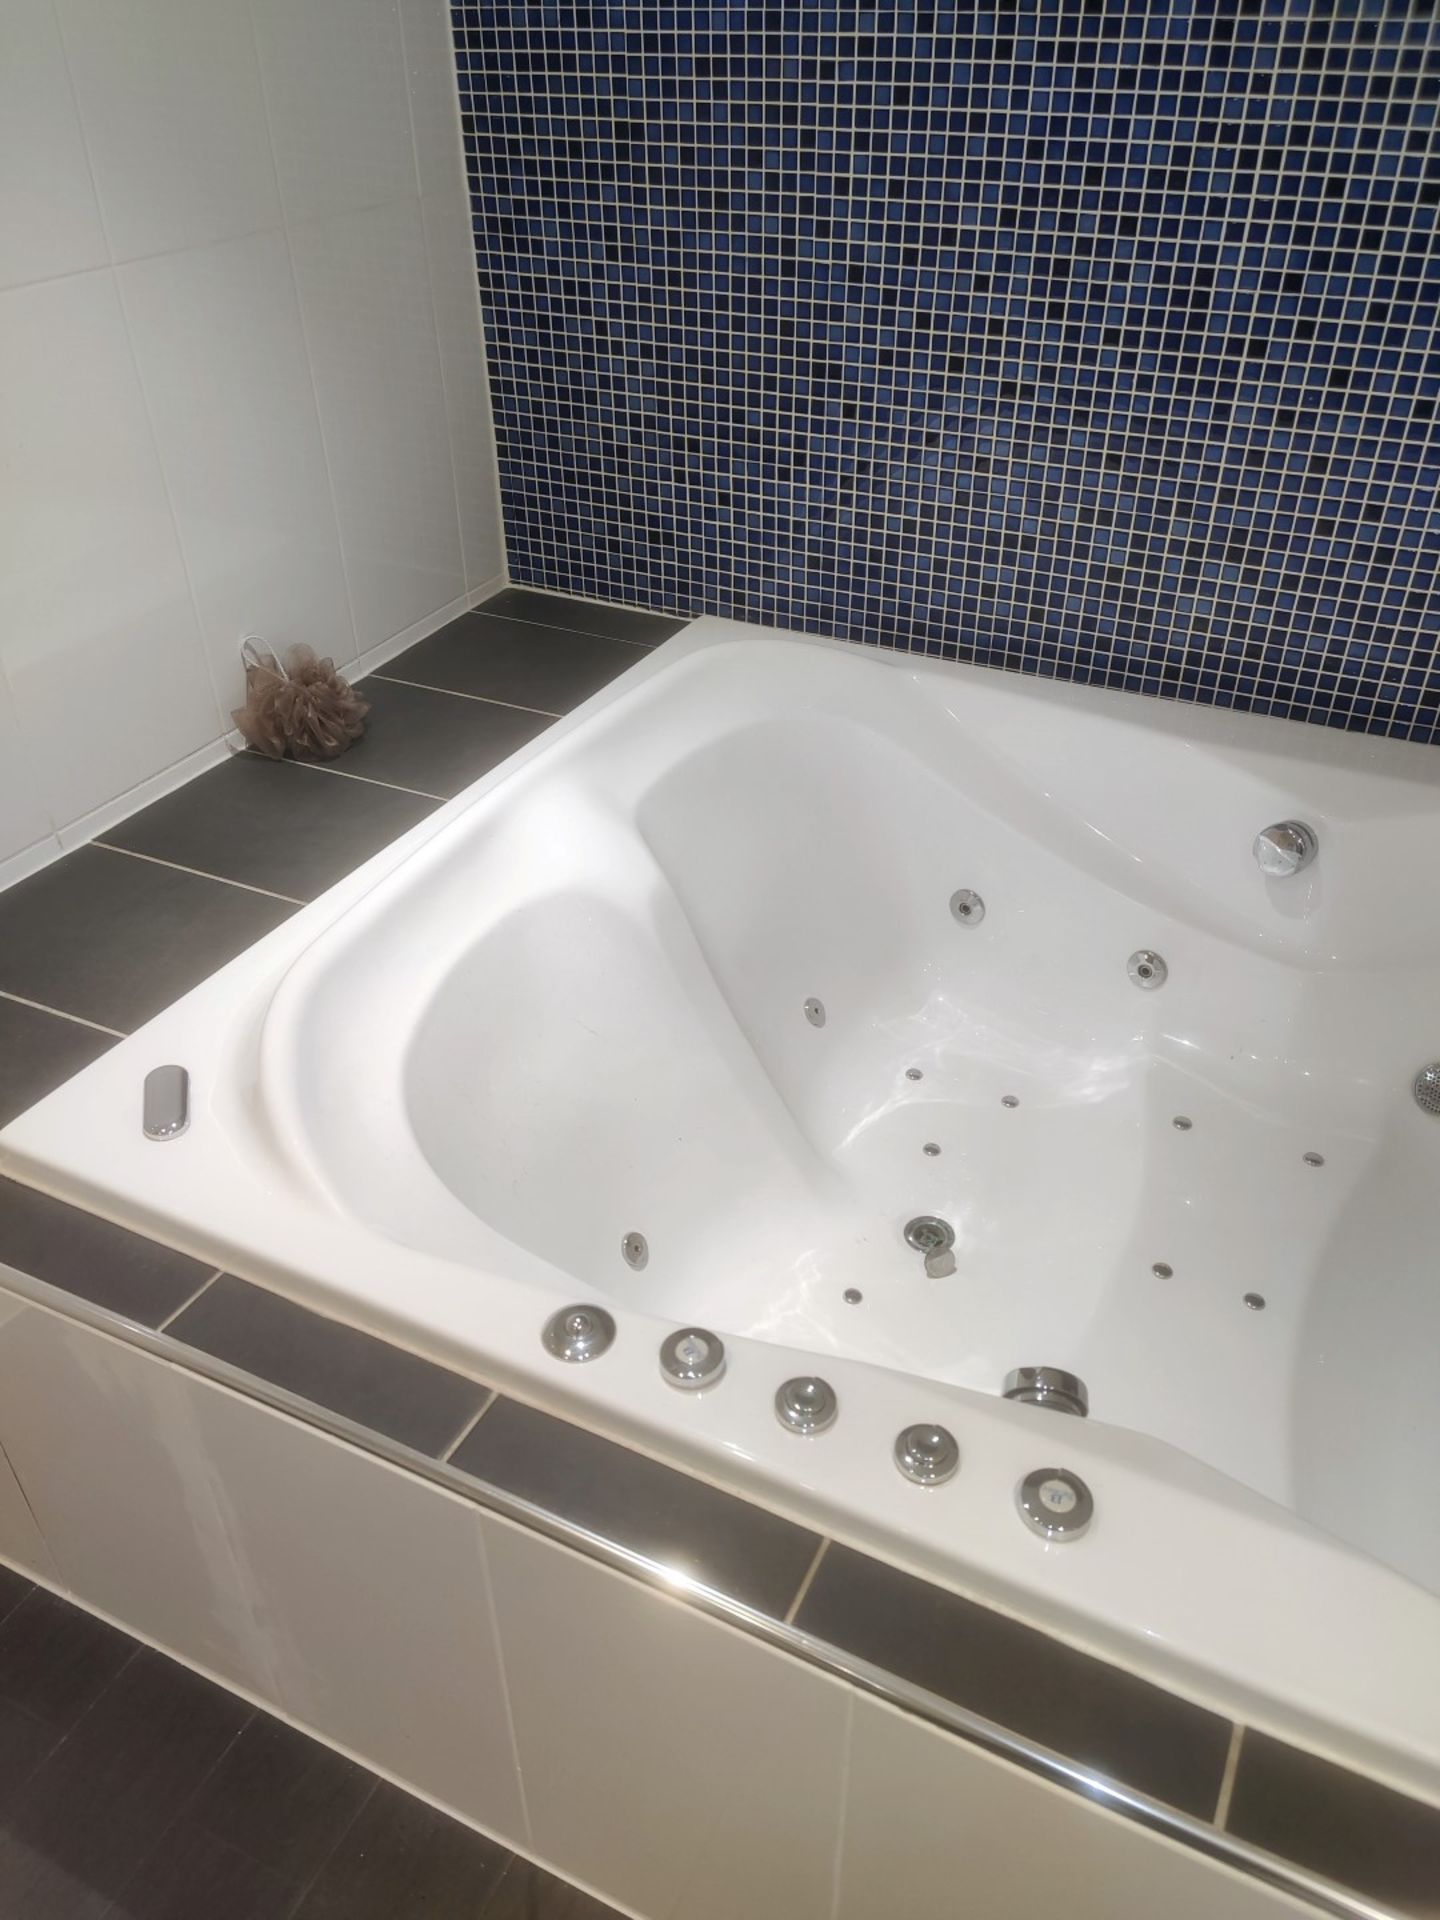 1 x Bronte Jacuzzi Whirlpool Bath - Approx 6.5ft x 5ft Size - Includes Brassware, Water Jets & Pump - Image 15 of 15